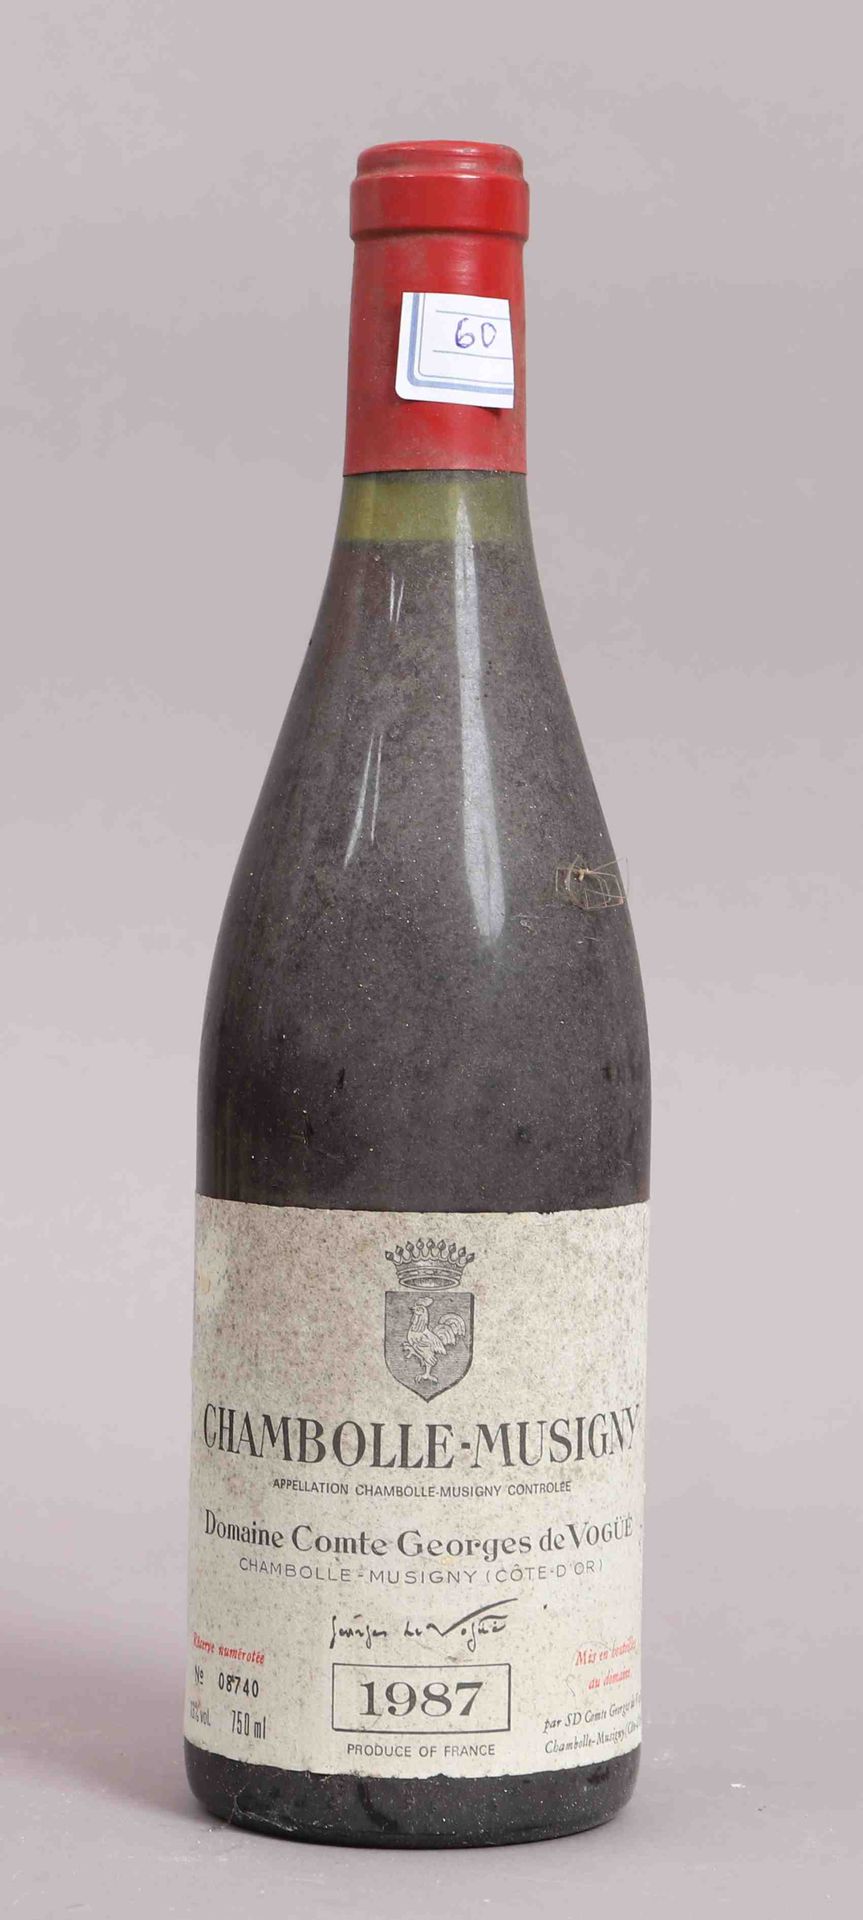 Null Chambolle-Musigny (x1) 
Domaine Comte Georges de Vogue (x1)
1987 
0,75L